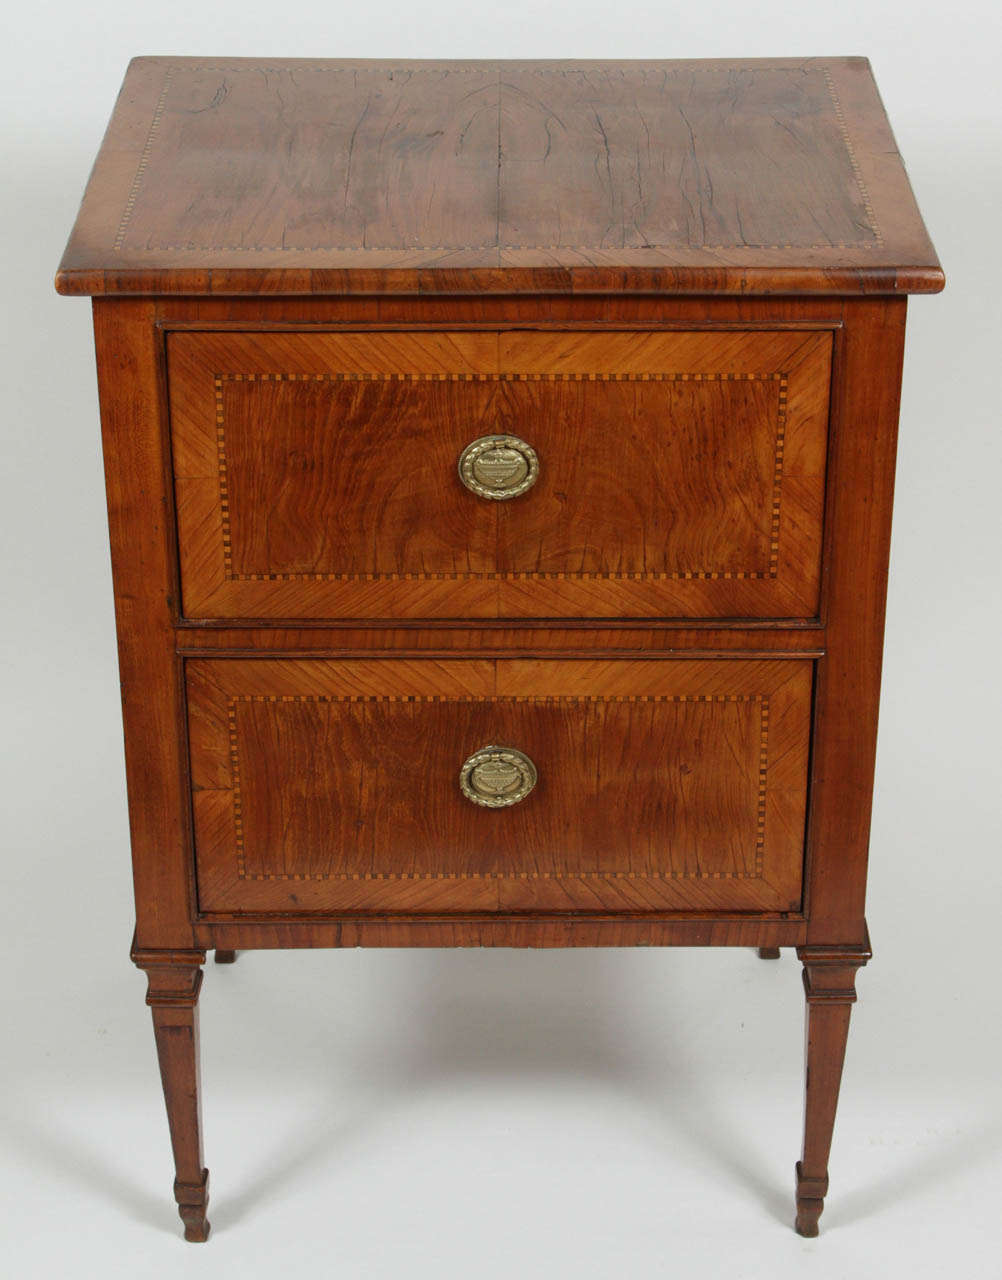 Italian chest with two drawers and square tapered legs terminating in spade style feet. Delicate contrasting marquetry inlay with cross banding details. Original hardware.